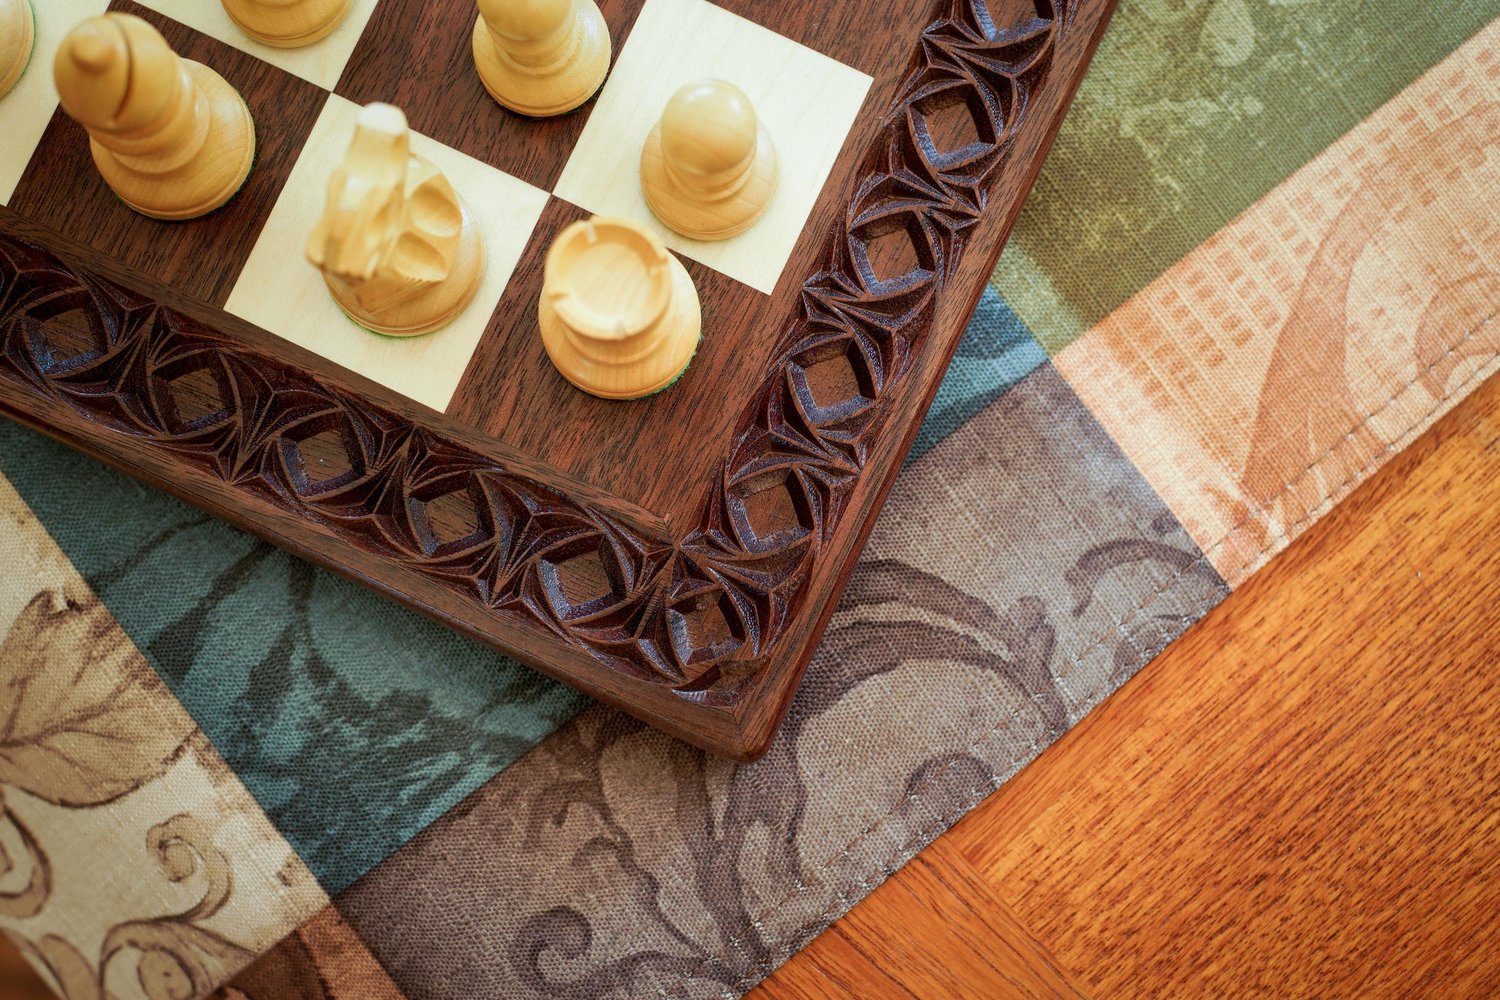 Tournament size wooden chess board with carved border and wooden pieces —  Three Trees Workshop